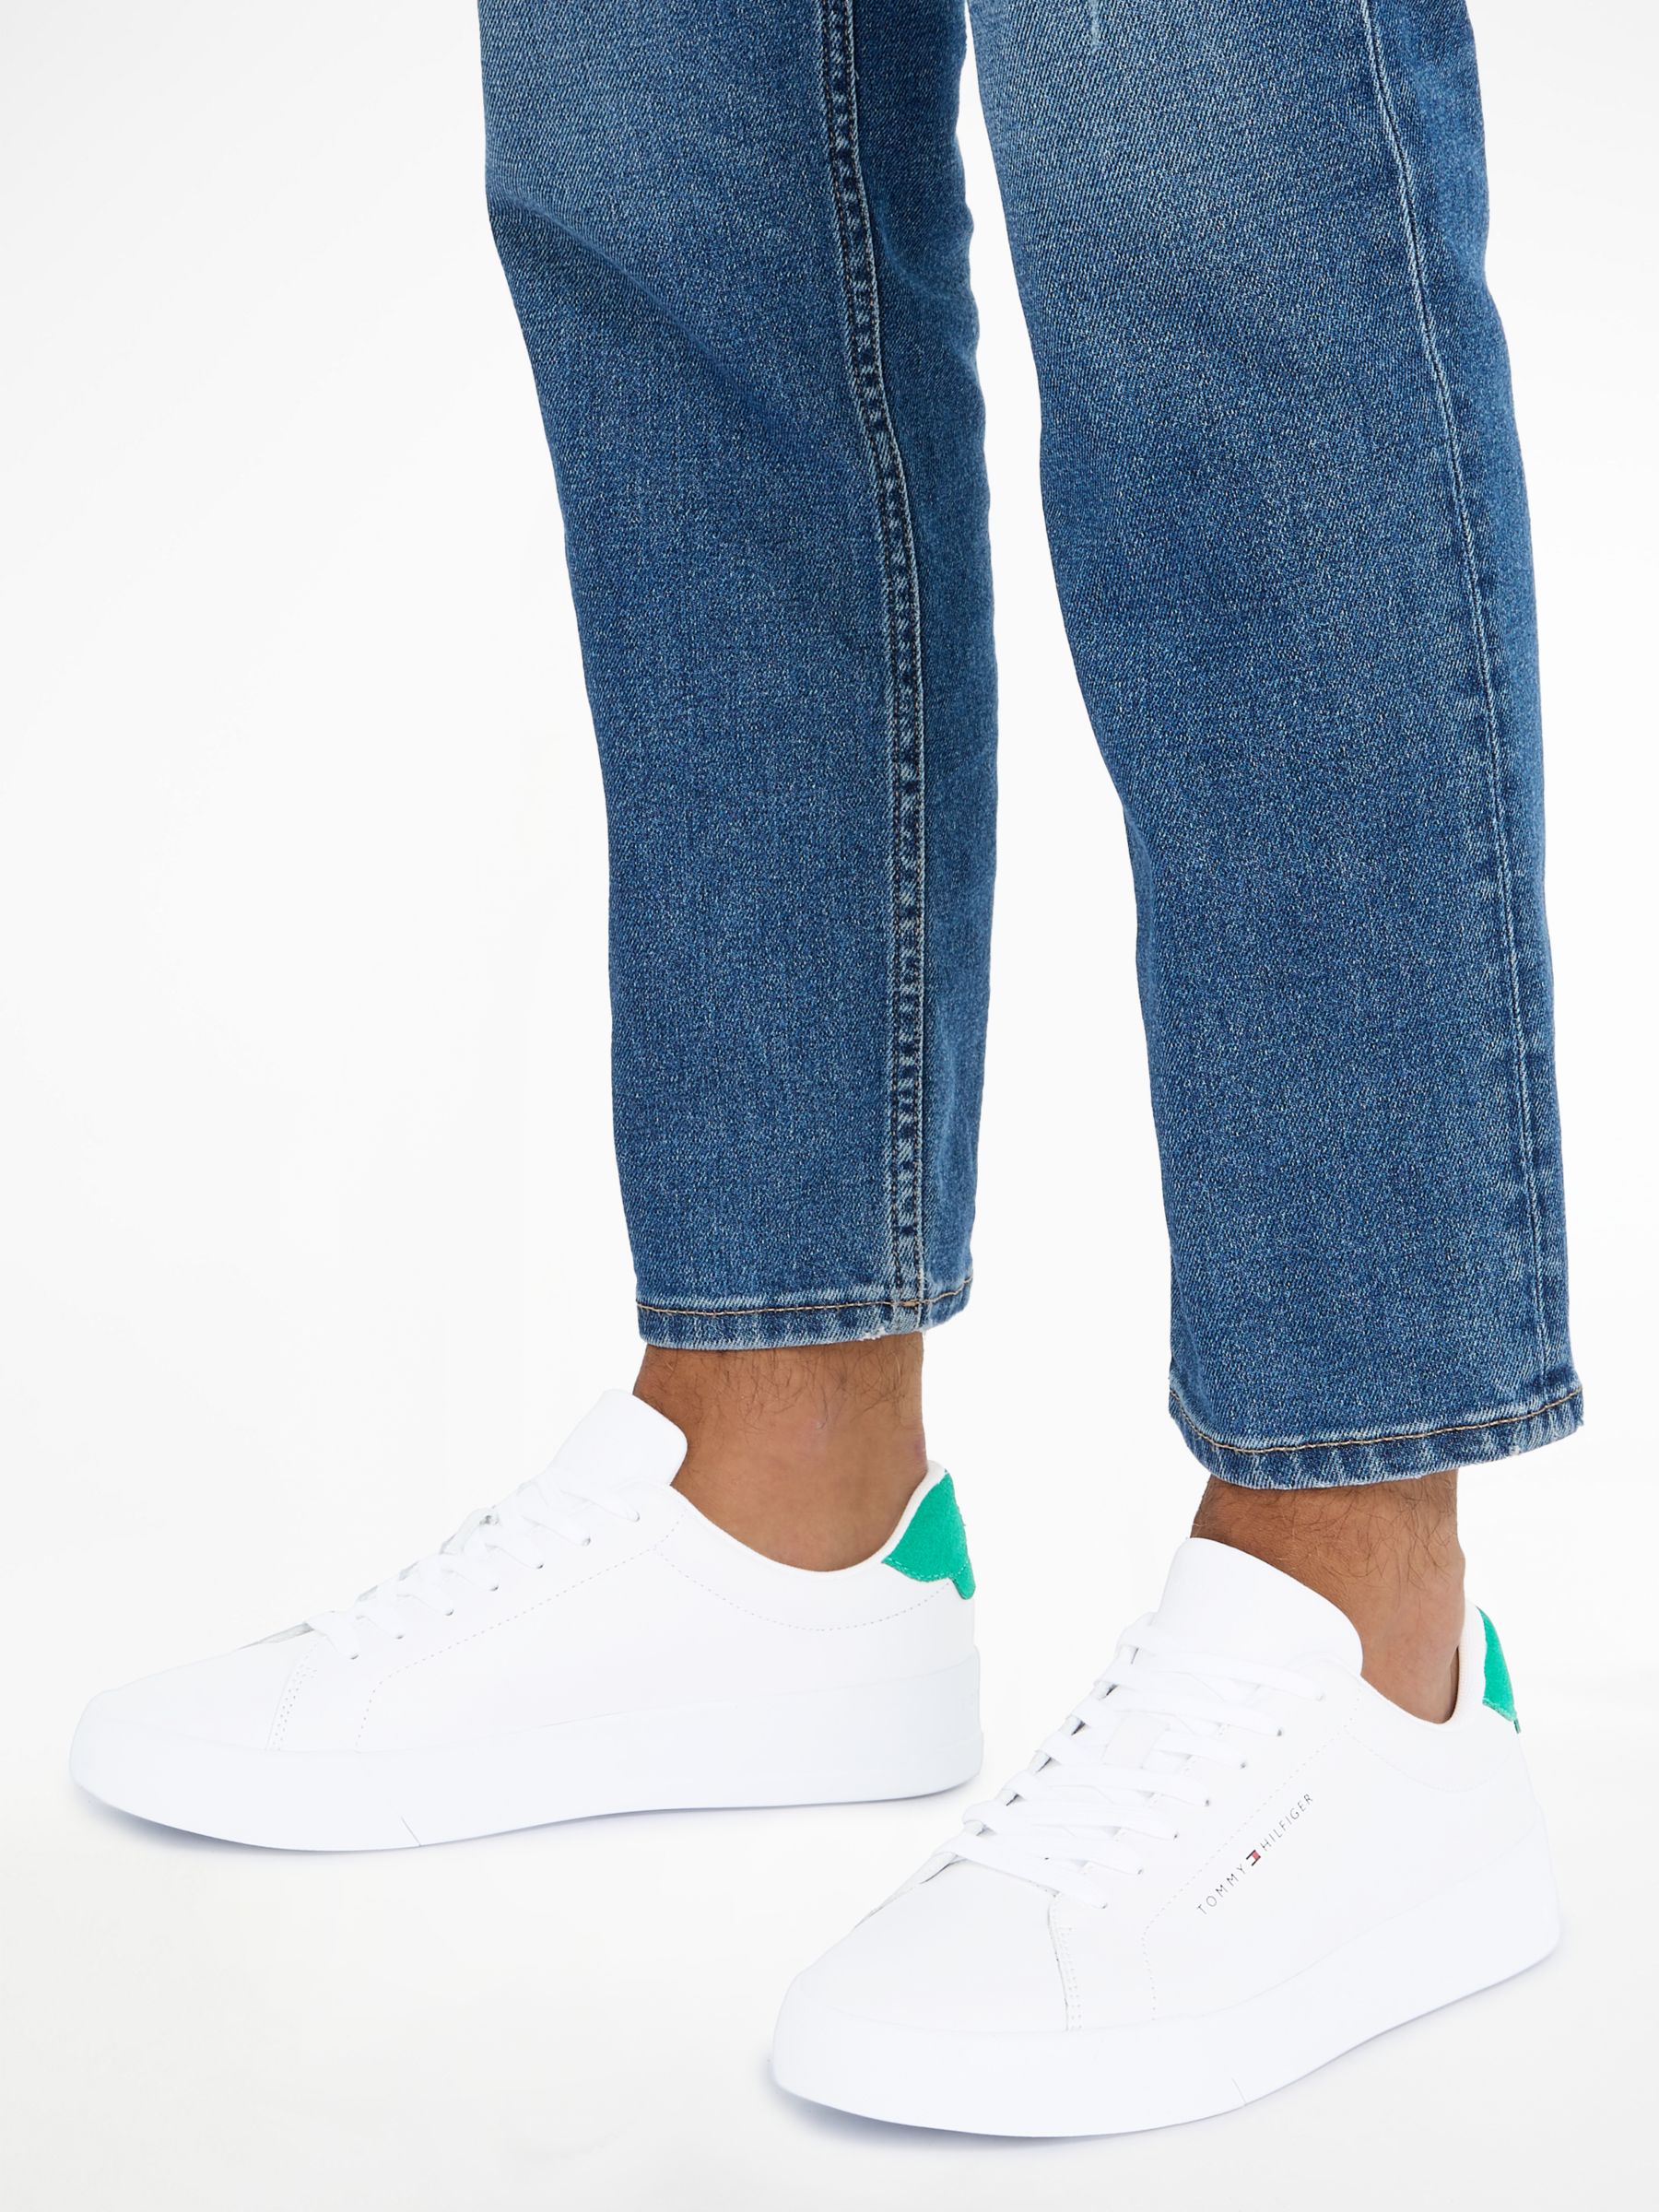 Buy Tommy Hilfiger Low Top Leather Trainers, White/Olympic Green Online at johnlewis.com